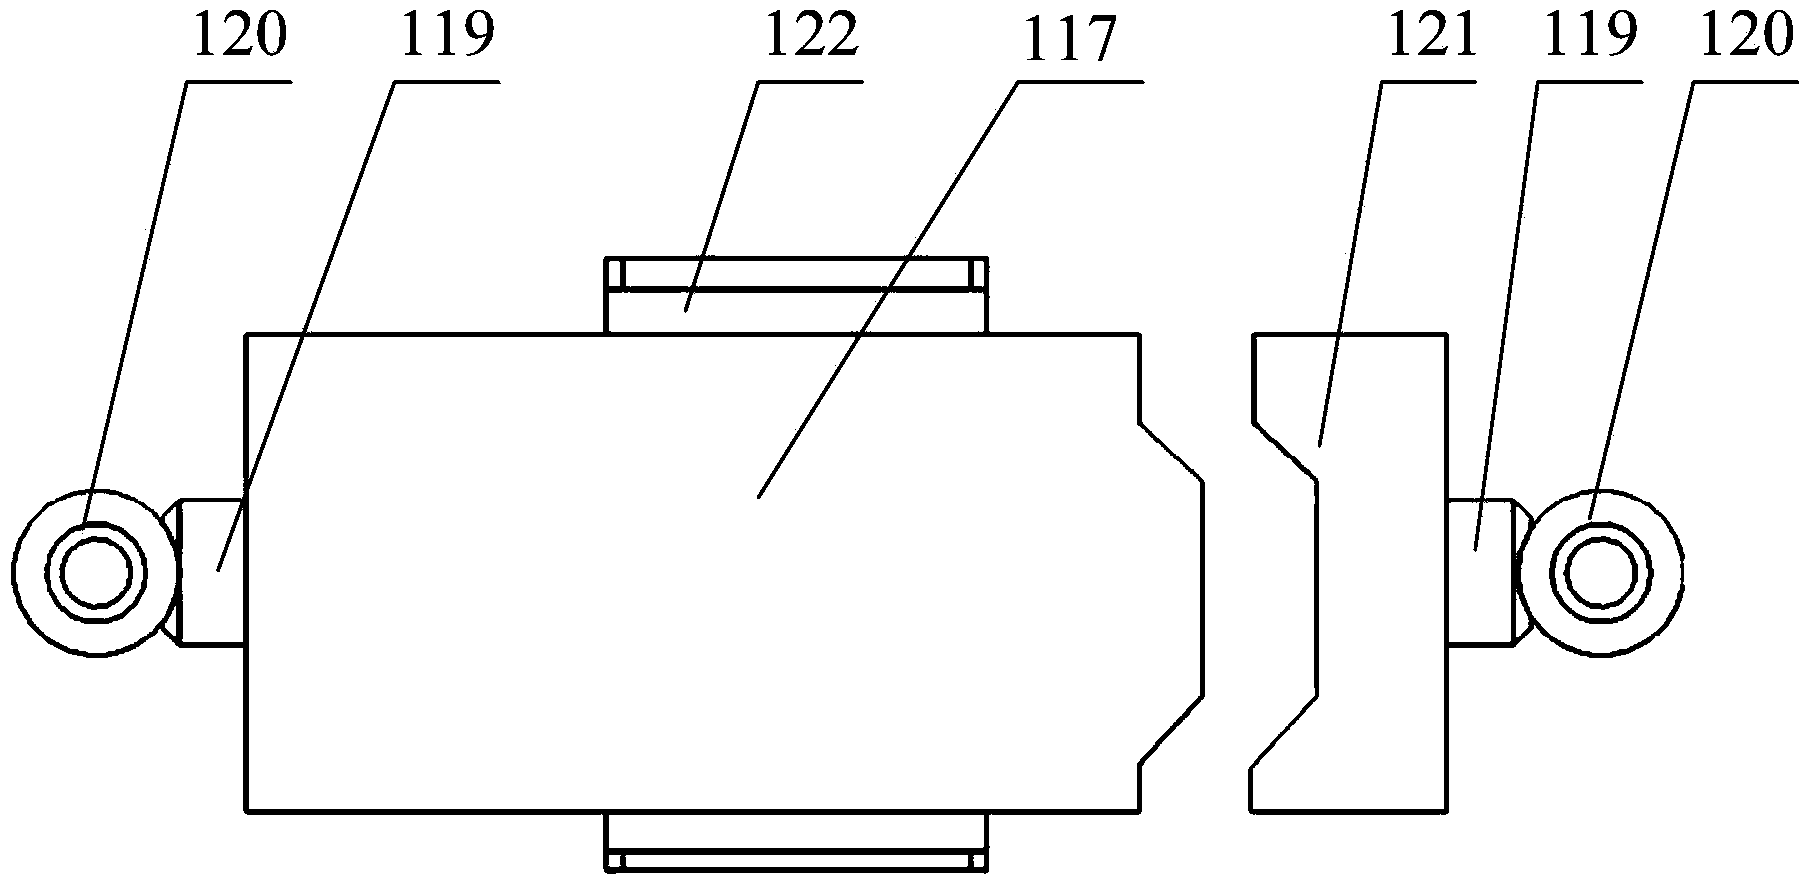 Novel seat with support structure